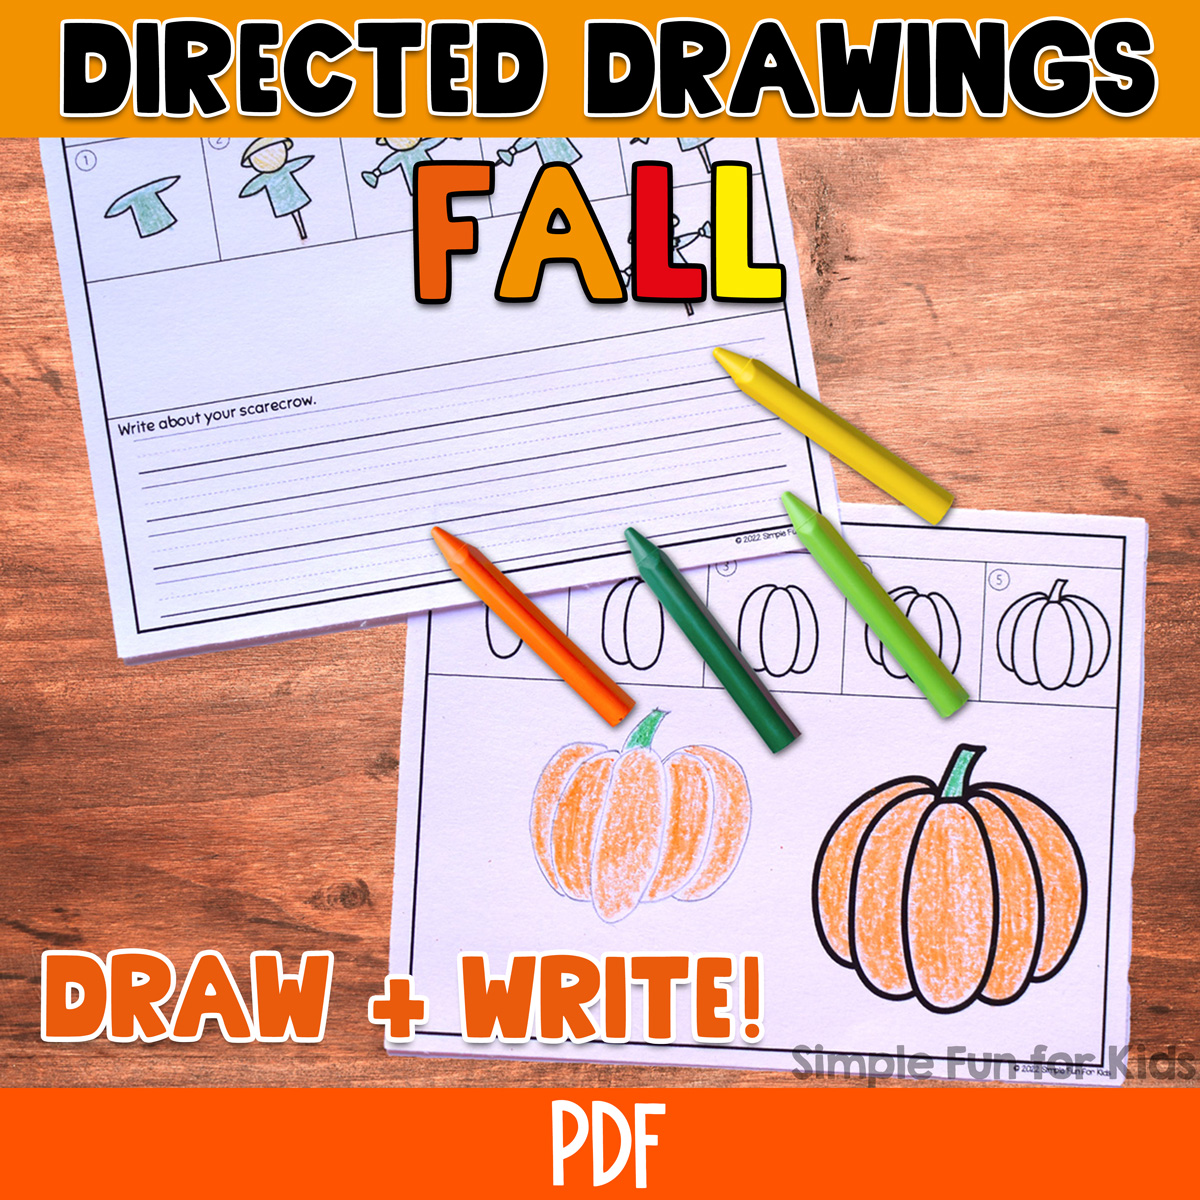 Square title image for Fall Directed Drawing Worksheets. At the top, it says directed drawings on top of an orange banner in black. Below the banner, it says FALL in shades of orange, red, and yellow. At the bottom, it says draw and write in orange above an orange banner with PDF on it in white. The main image shows the scarecrow and pumpkin directed drawing worksheets with orange, green, and yellow crayons on top of the paper. Everything is on top of a brown wooden desktop.